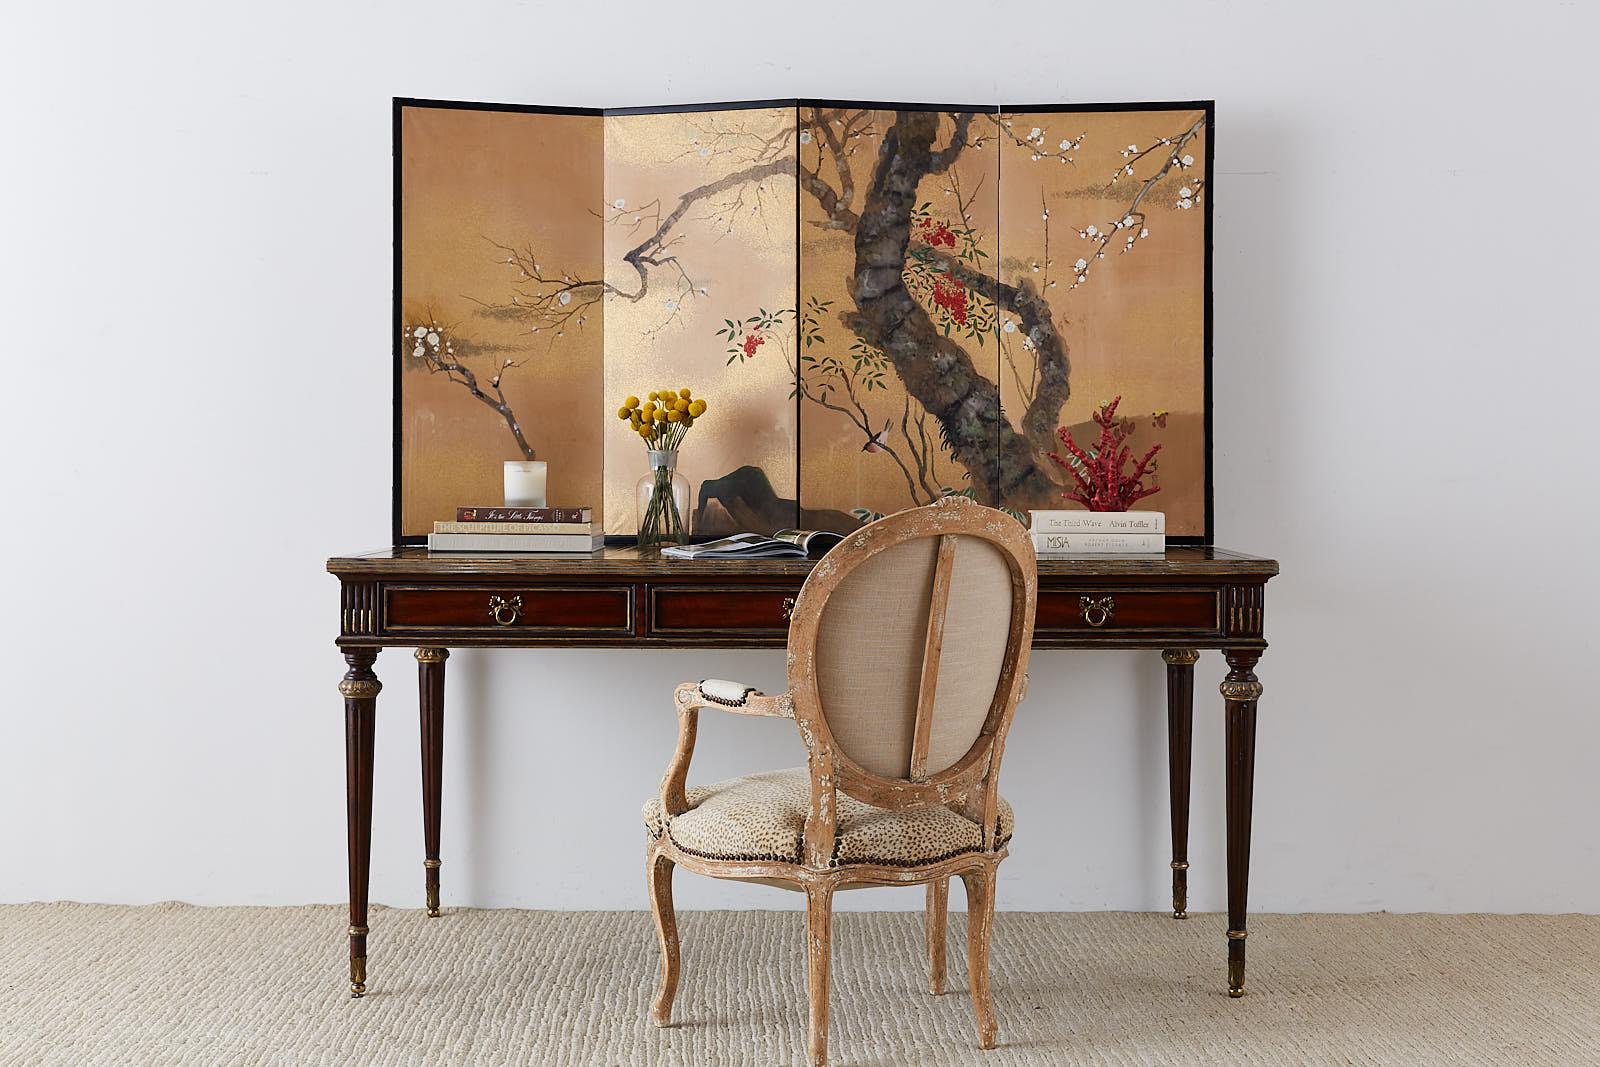 Colorful Japanese four-panel screen depicting a prunus tree with a songbird perched in a red fruiting Nandina or sacred bamboo. Made in the Nihonga school style. Ink and color pigments on gold colored paper. Signed by artist Shunsho with a seal and